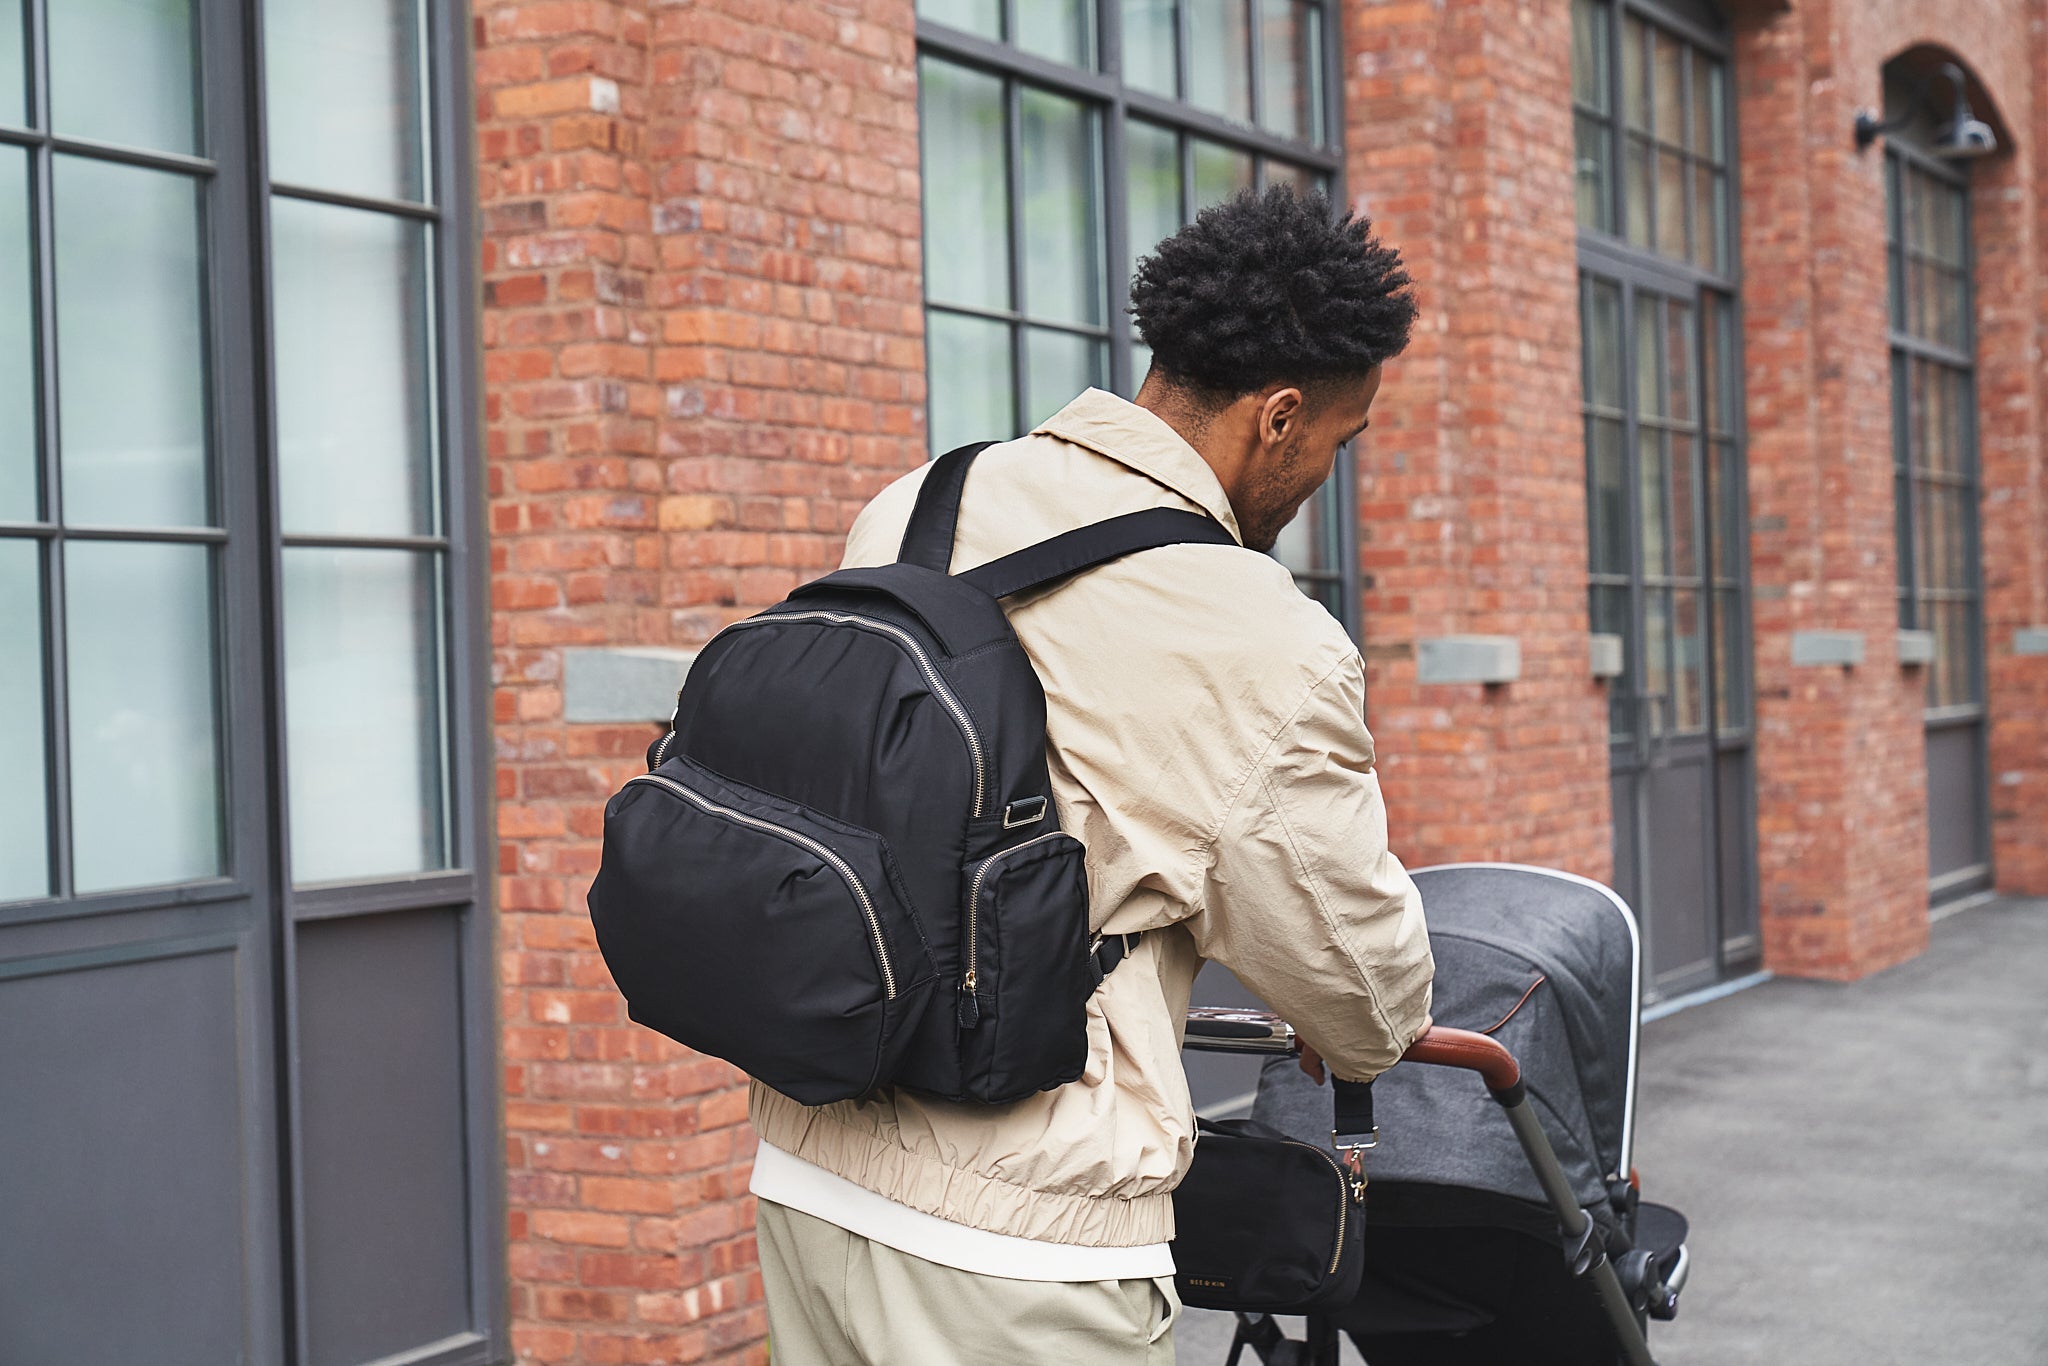 The Icon Backpack